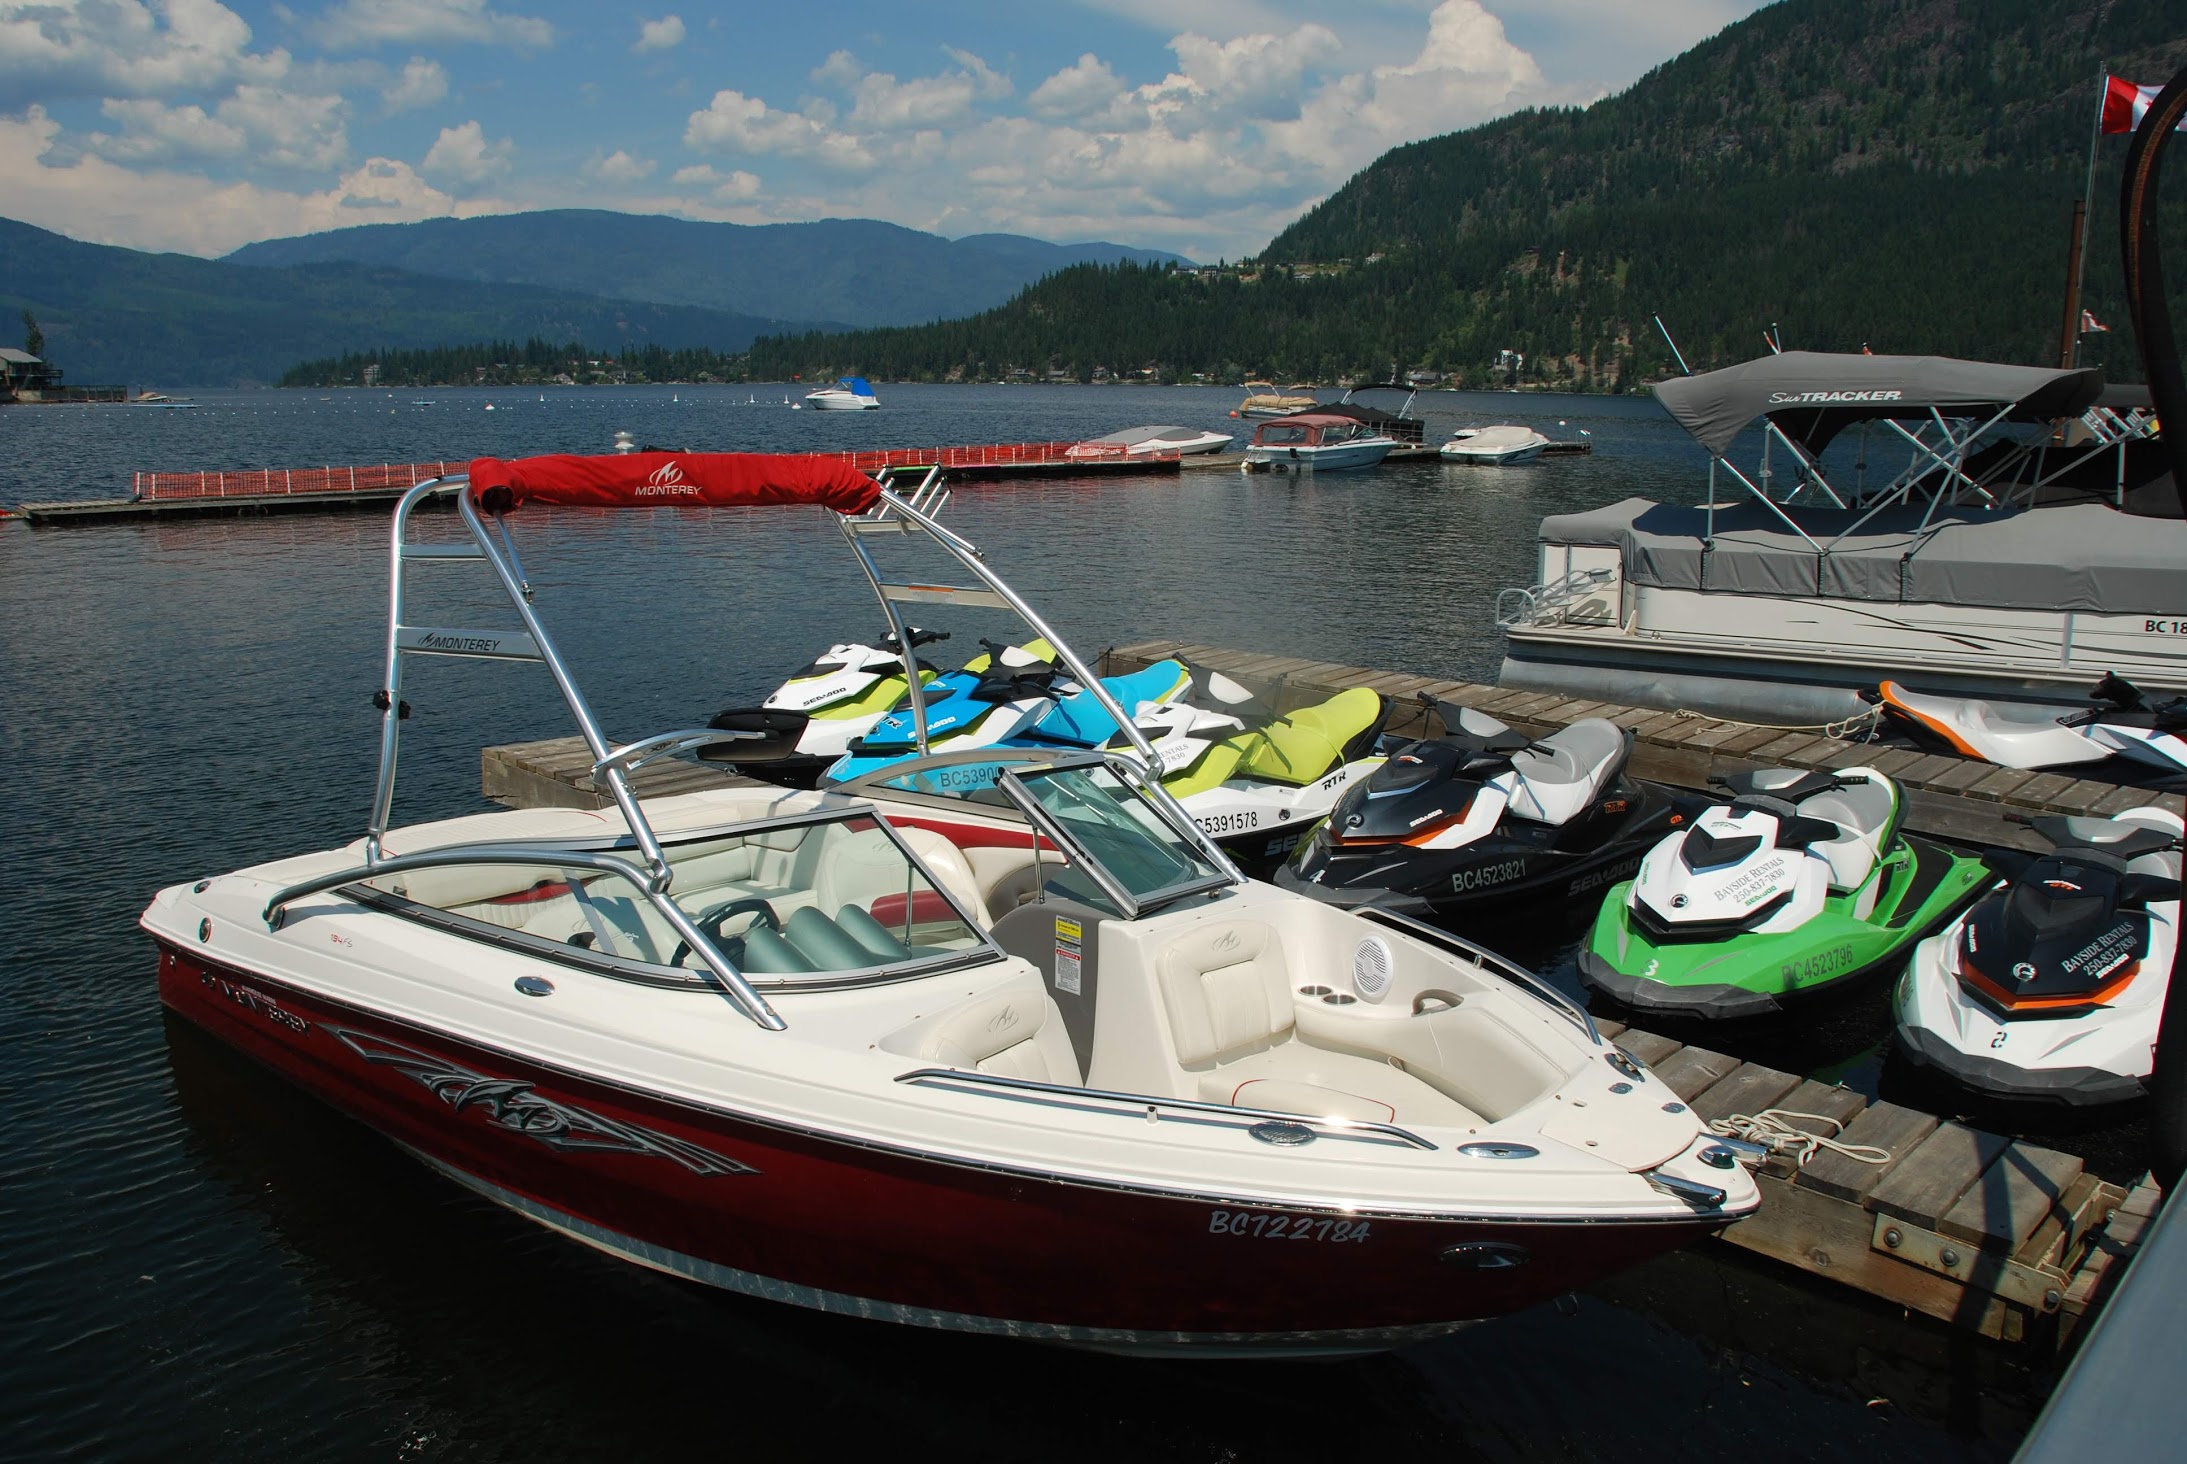 Bay Side Marina & Grill: Bayside Marina & Grill offers boat moorage, boat & Seadoo rentals, winter boat storage, and features a boat launch with parking so you can get out on the water